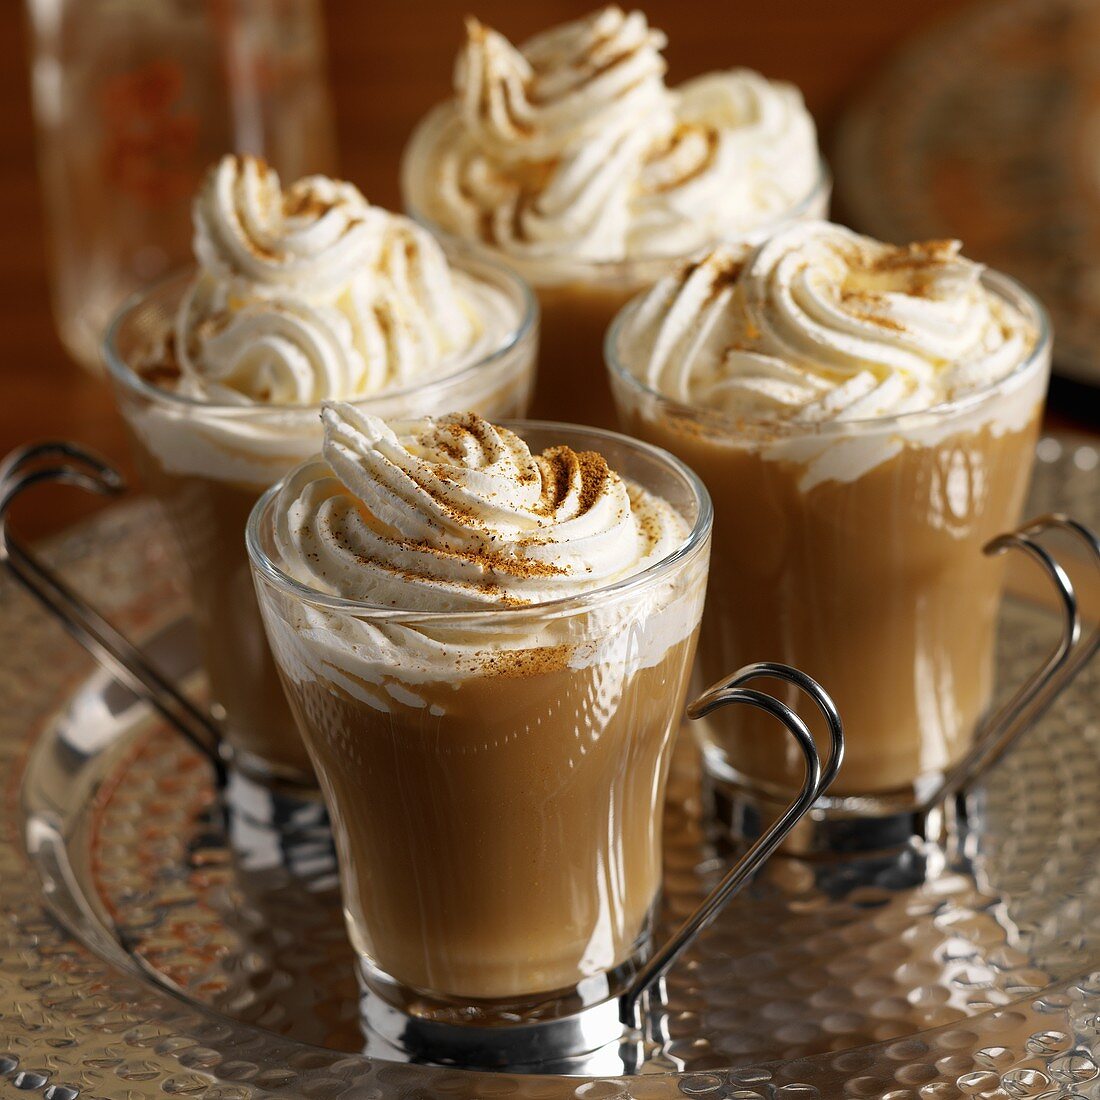 Pumpkin coffee (coffee with cream topping and nutmeg)